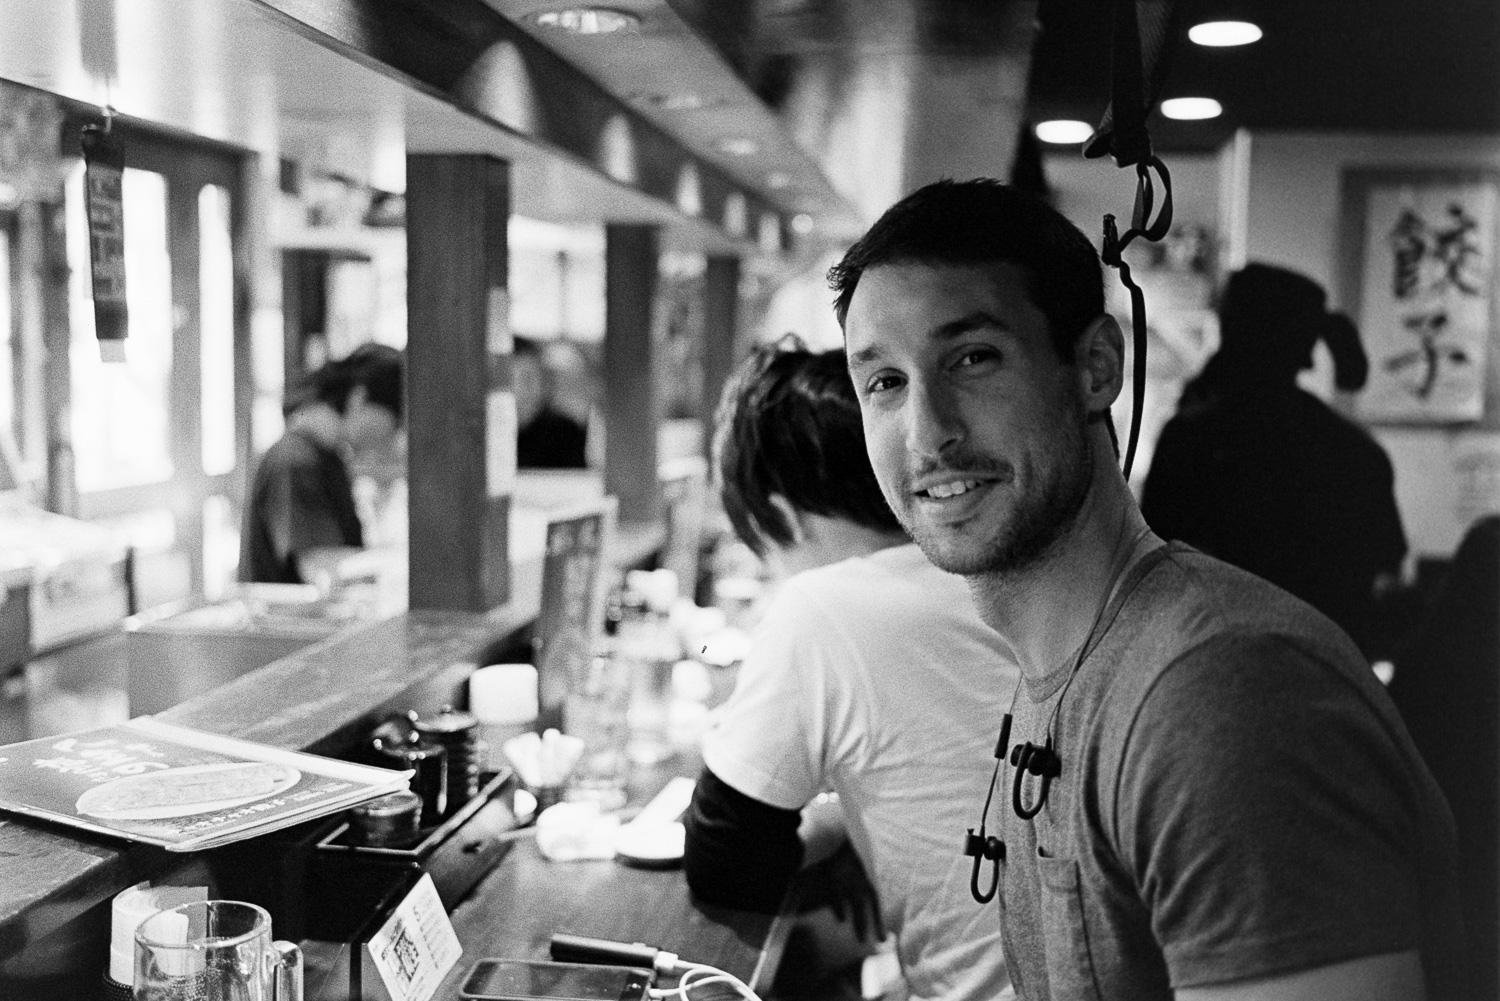  Tomer, an Israeli from Tel Aviv, who I chatted to while eating at Chao Chao Gyoza, Kyoto. 